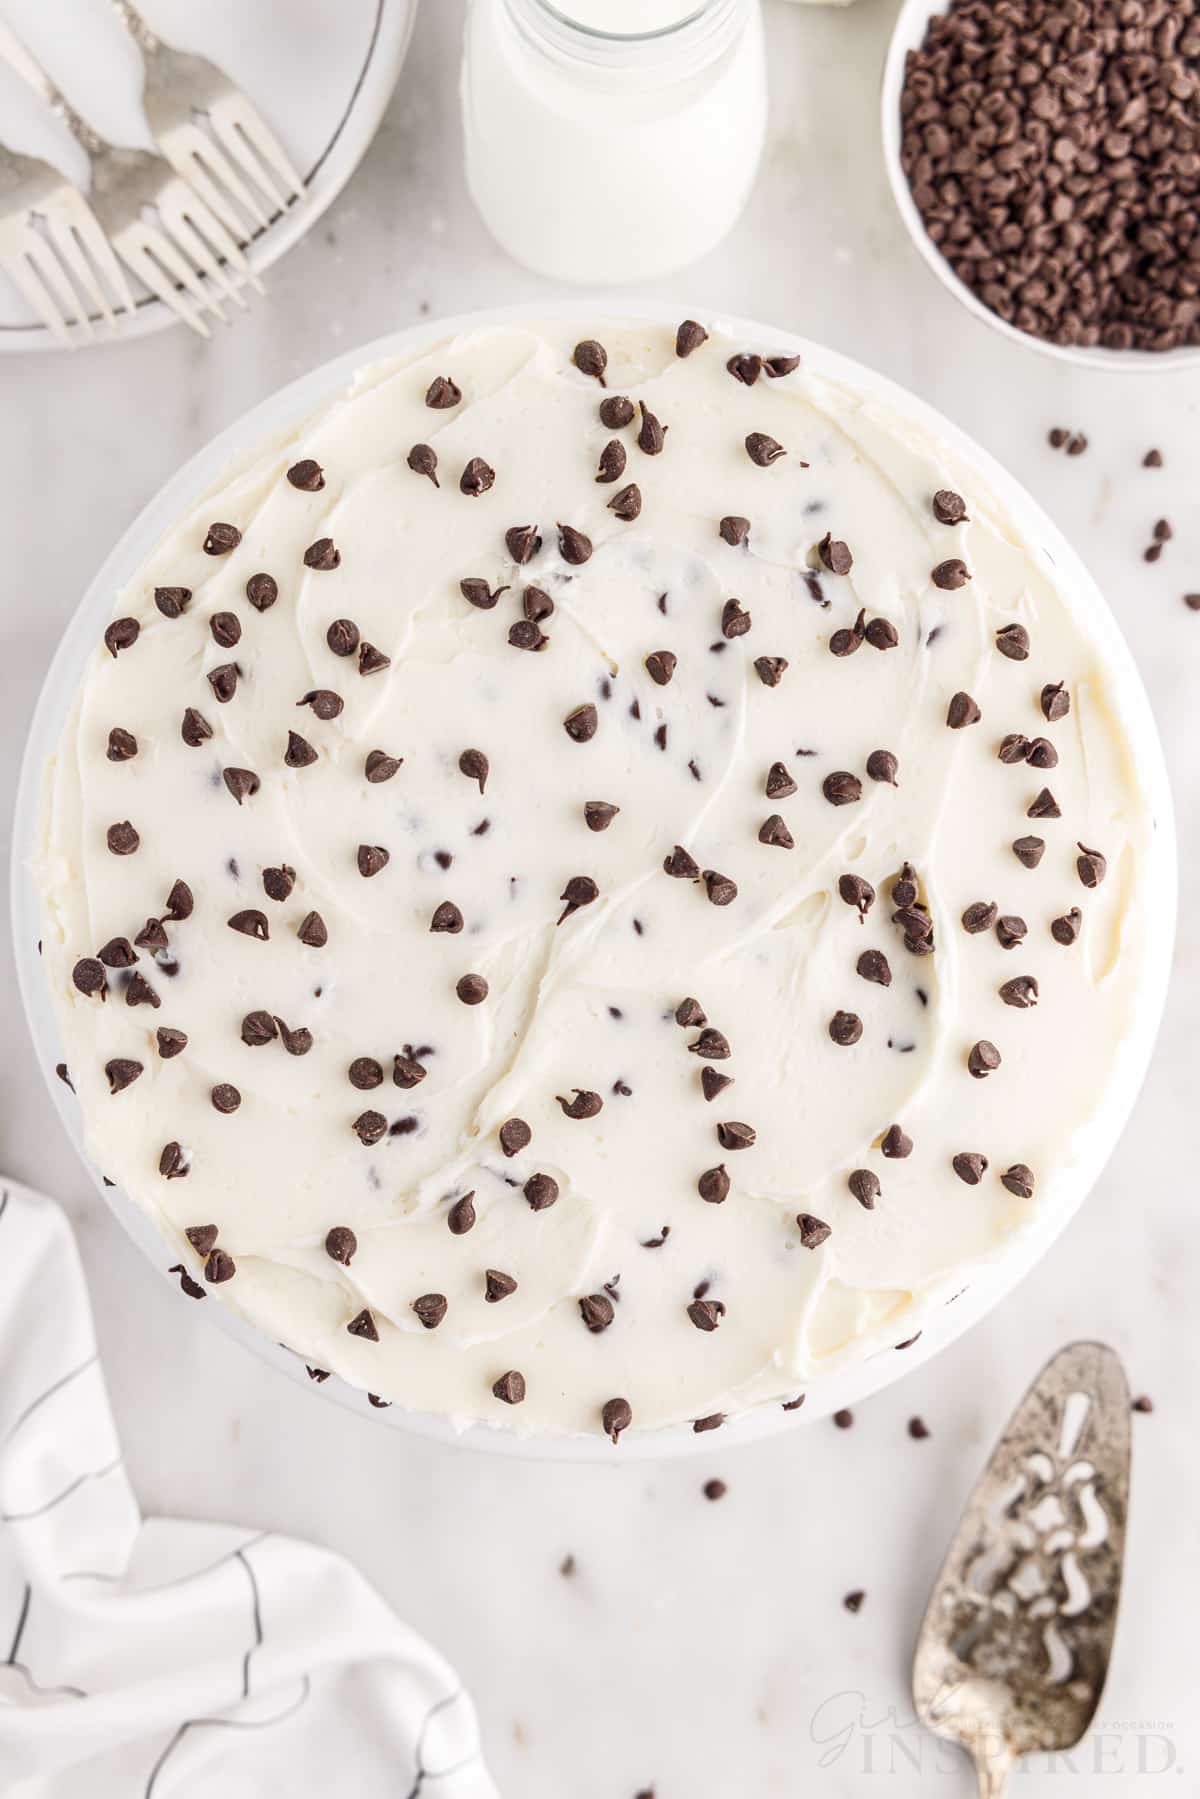 Overhead view of Chocolate Chip Cake.